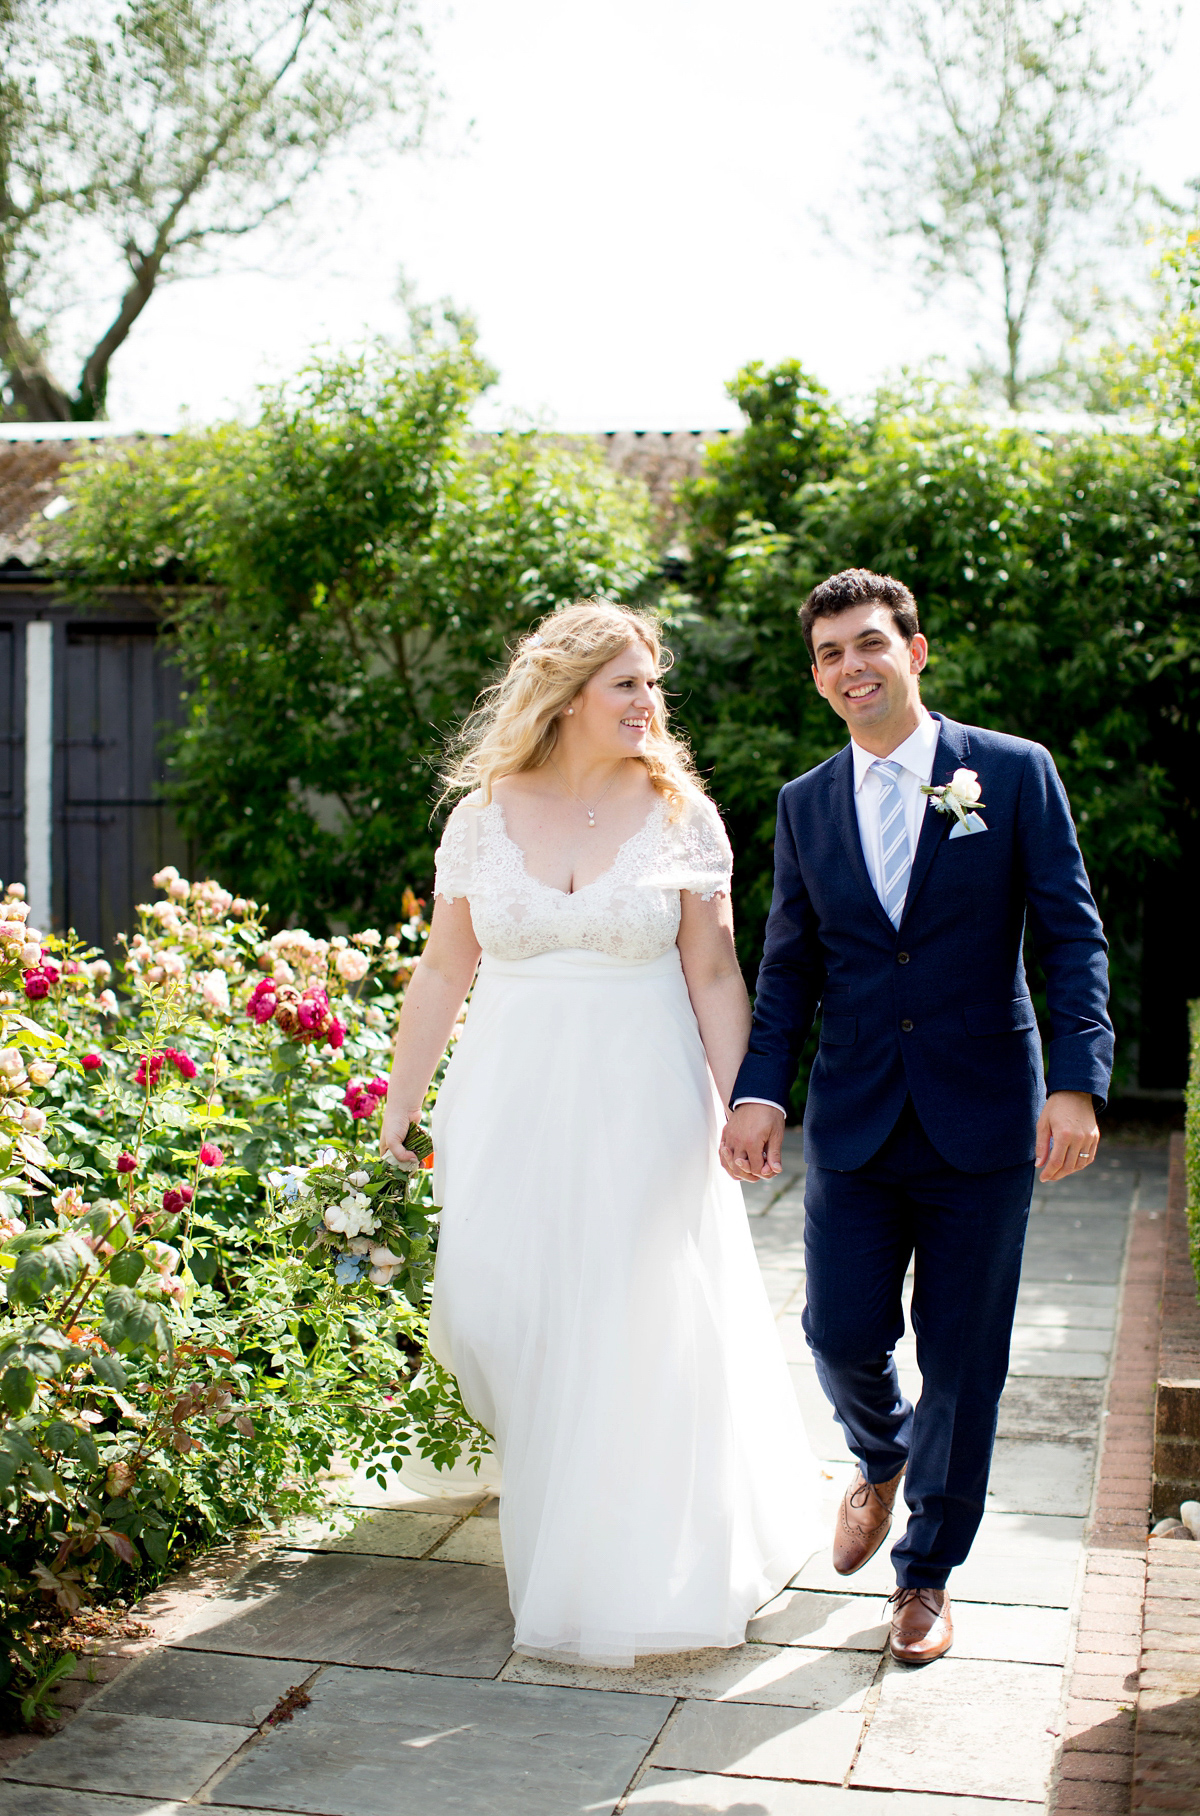 Victoria wore a Cymbeline Paris gown from Mirror Mirror Bridal in Islington for her relaxed and romantic country wedding. The reception was styled like a Green Tavern with long banquet tables. Photography by Helen Cawte.